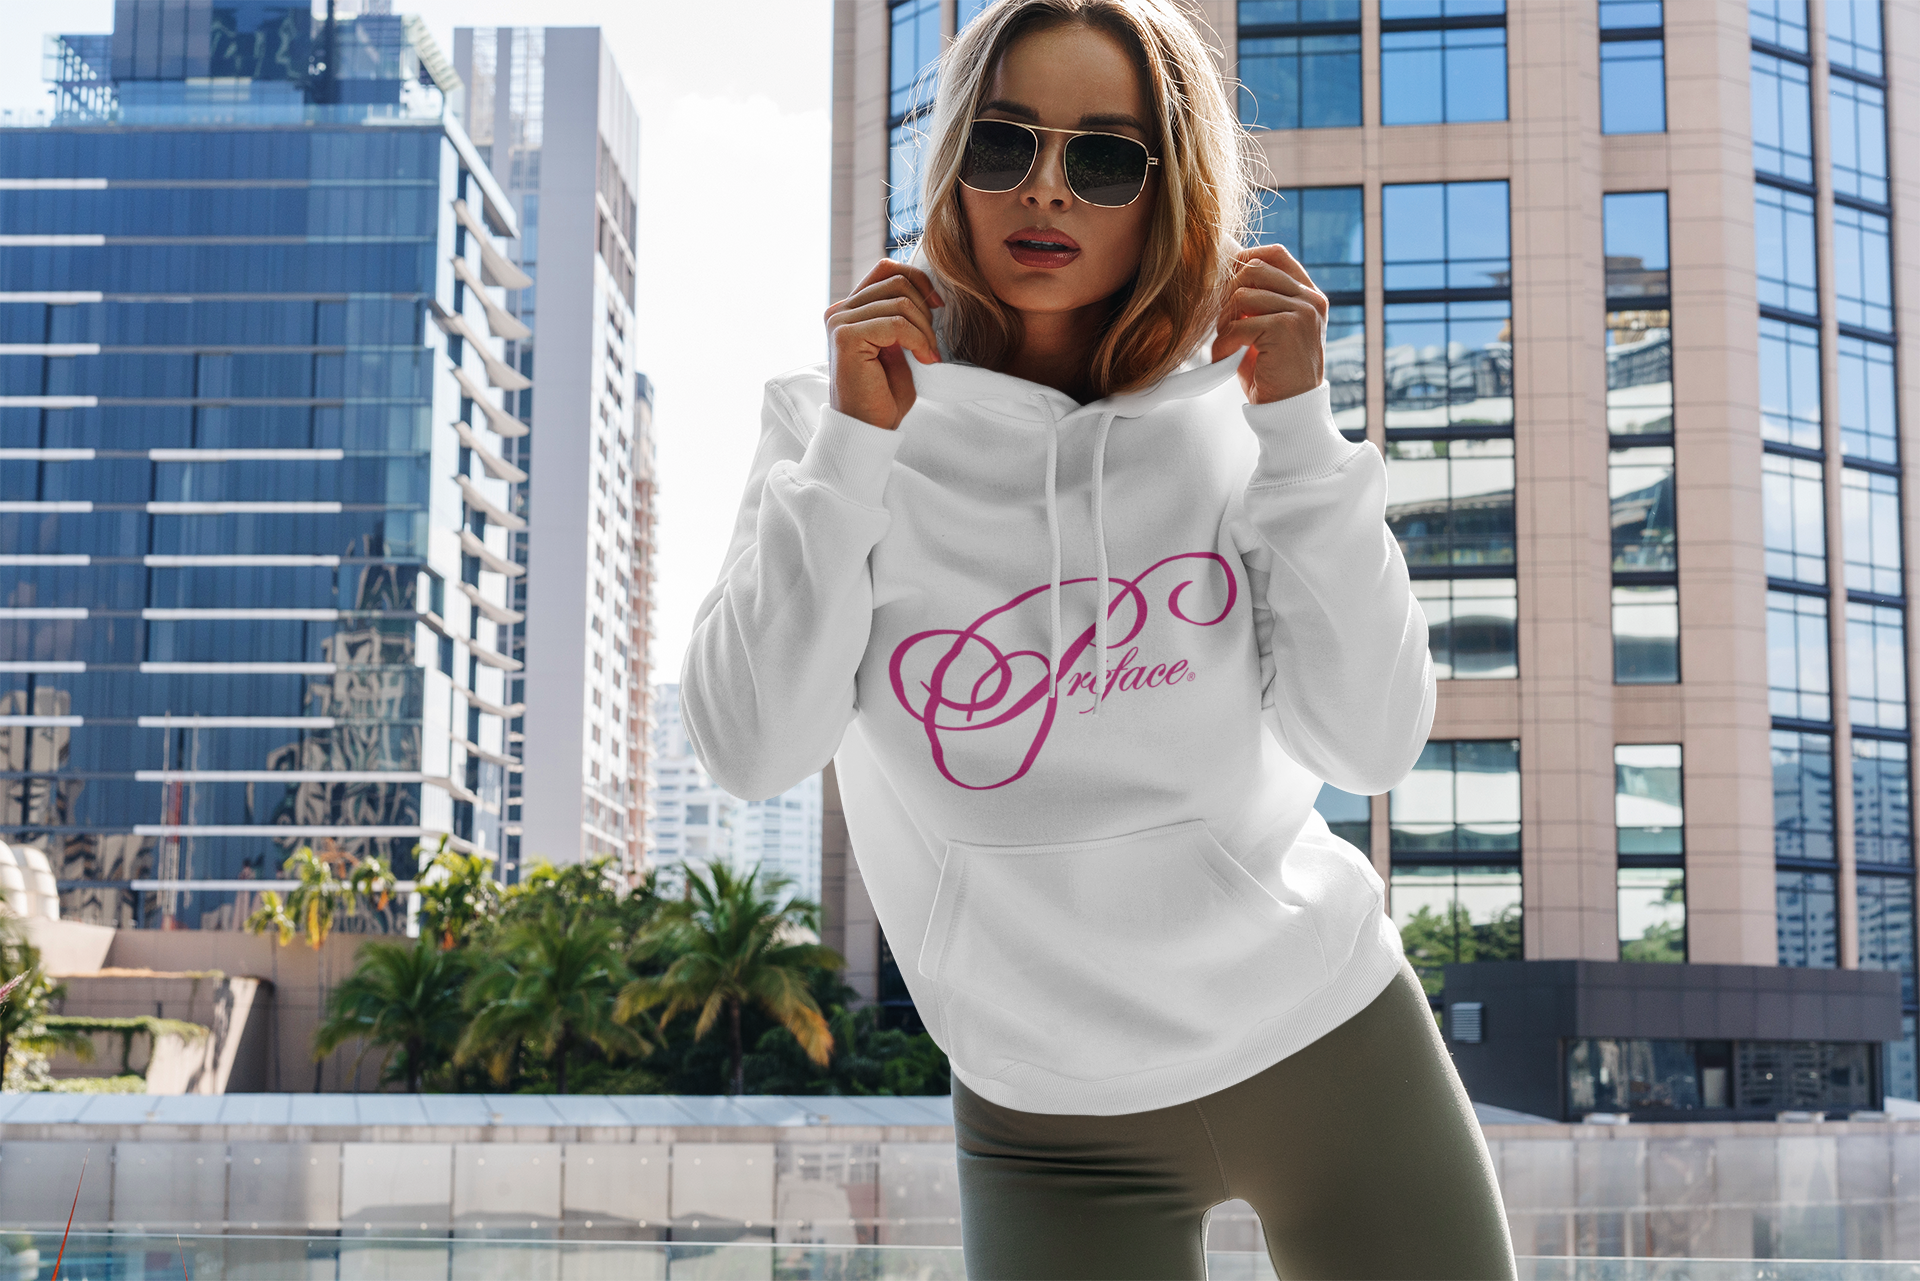 hoodie-mockup-featuring-a-woman-posing-and-some-buildings-in-the-background-3550-el1.png